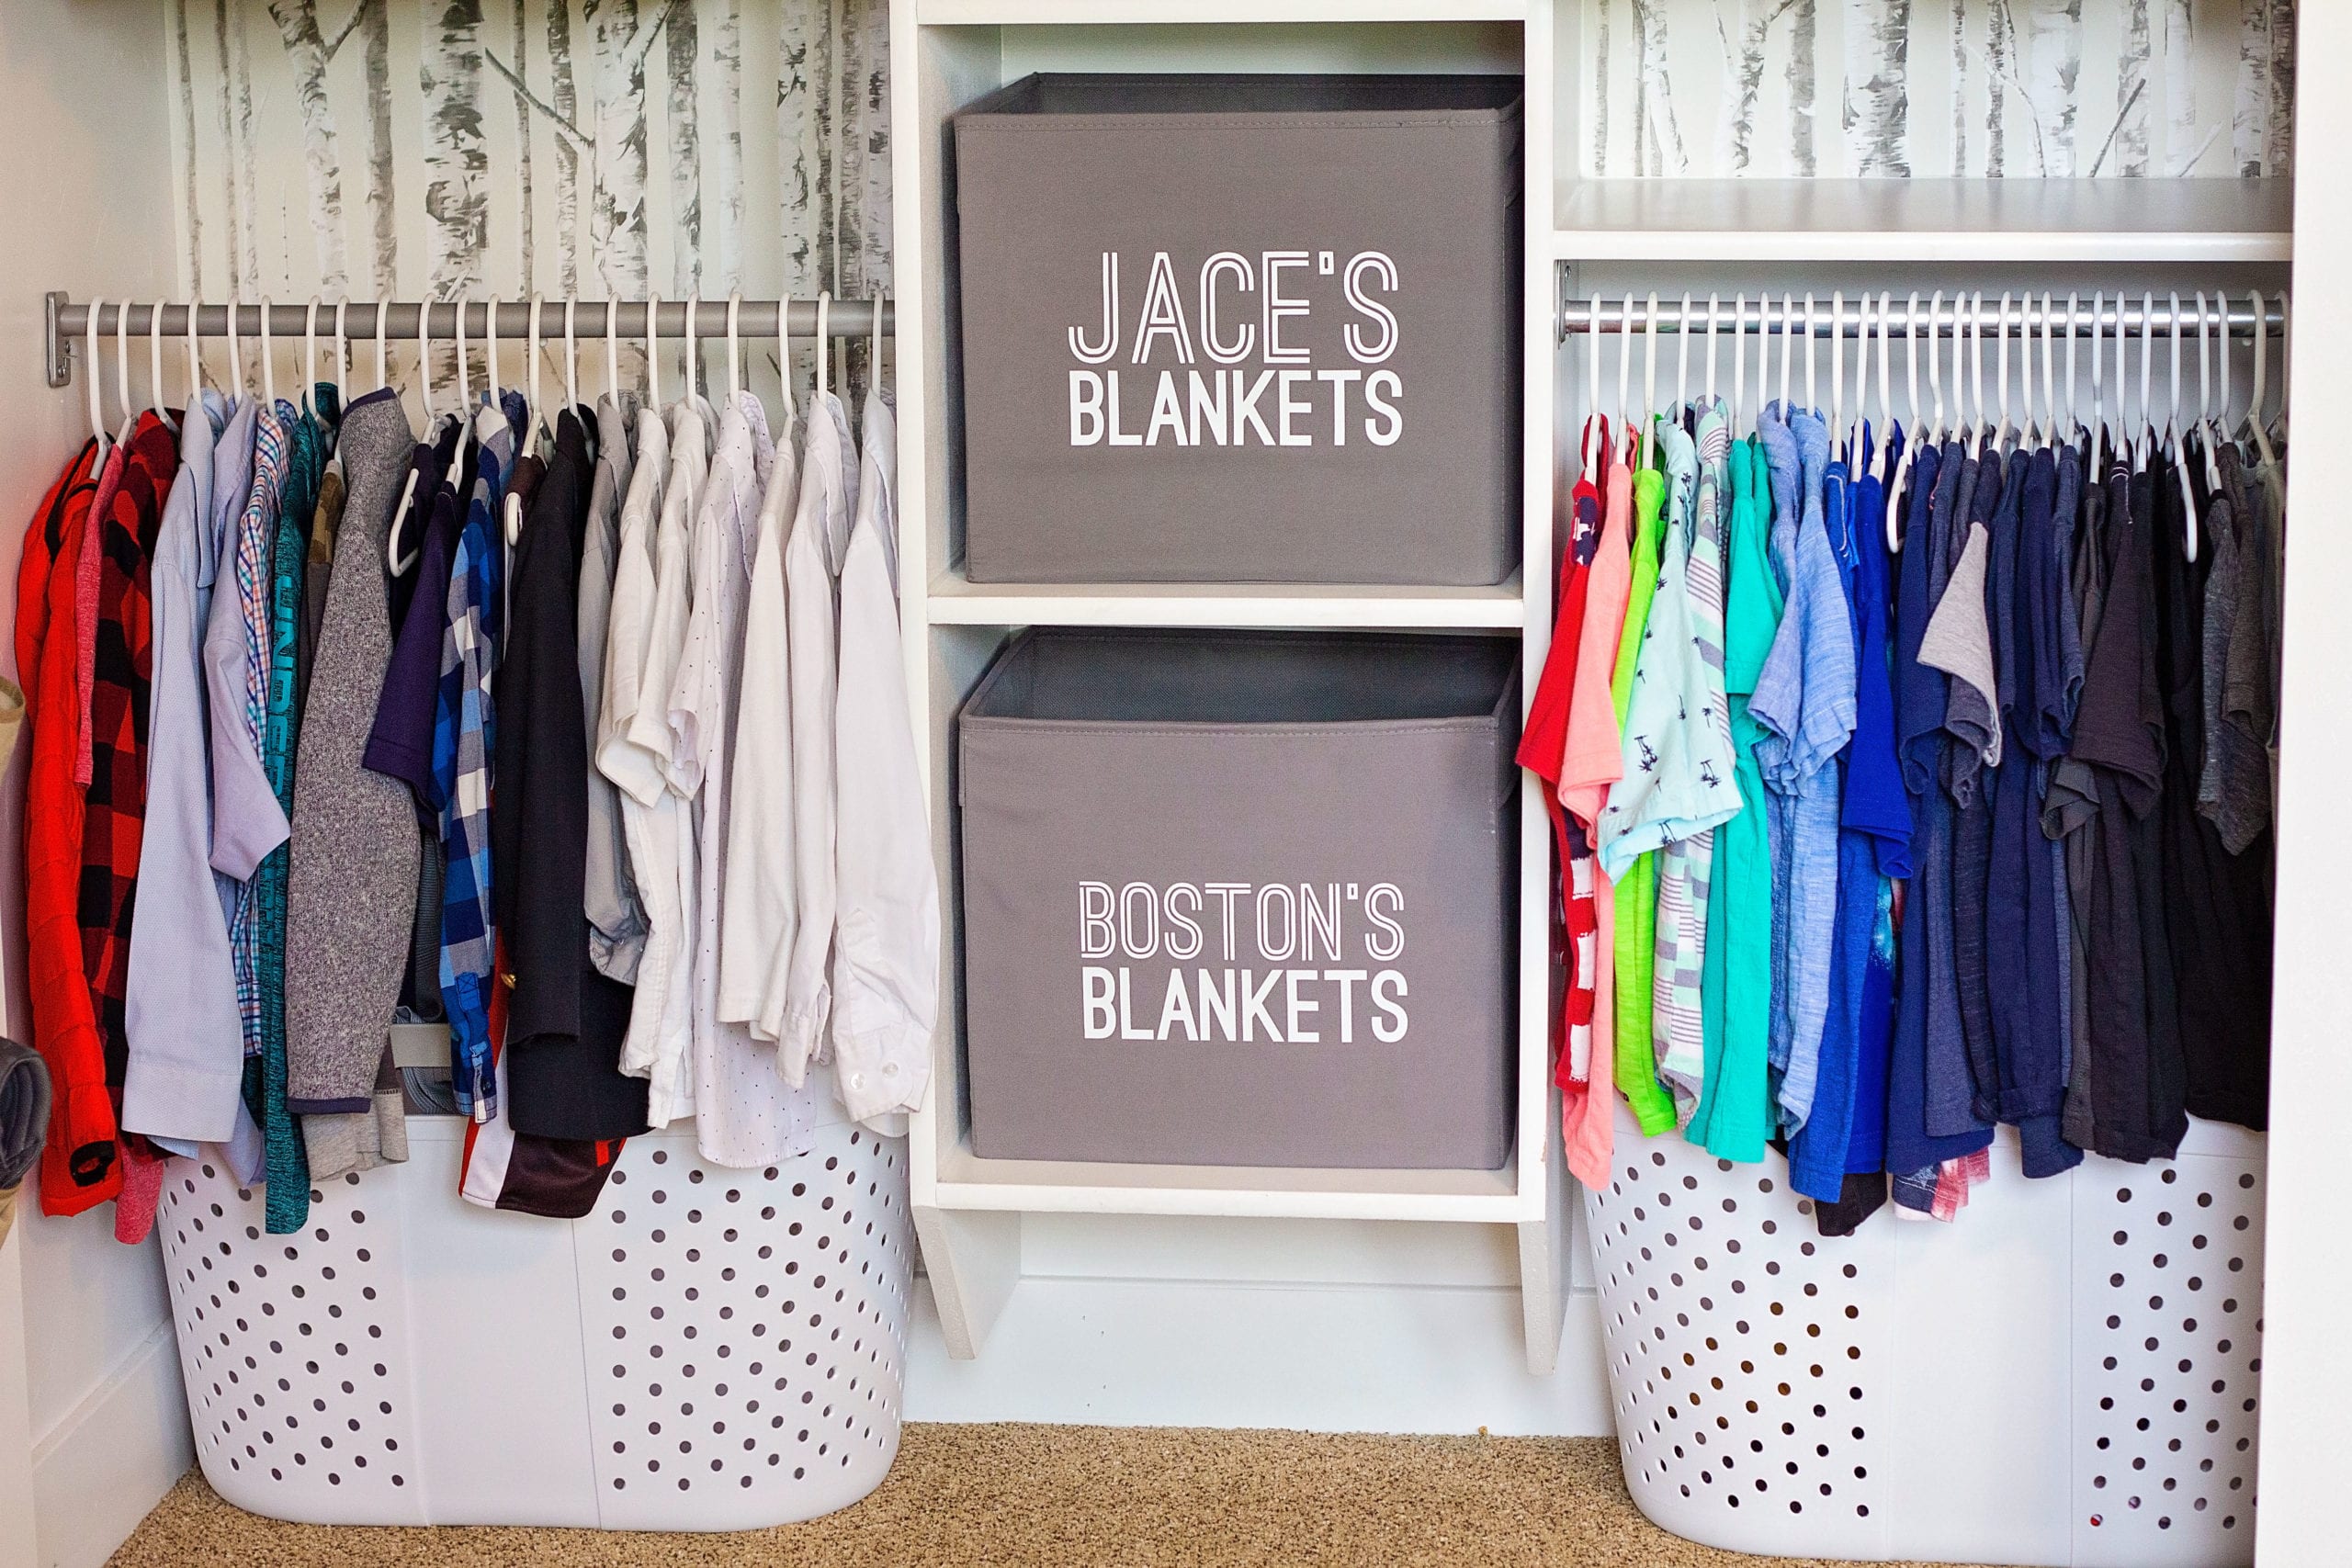 Easy Closet Organization how to Guide